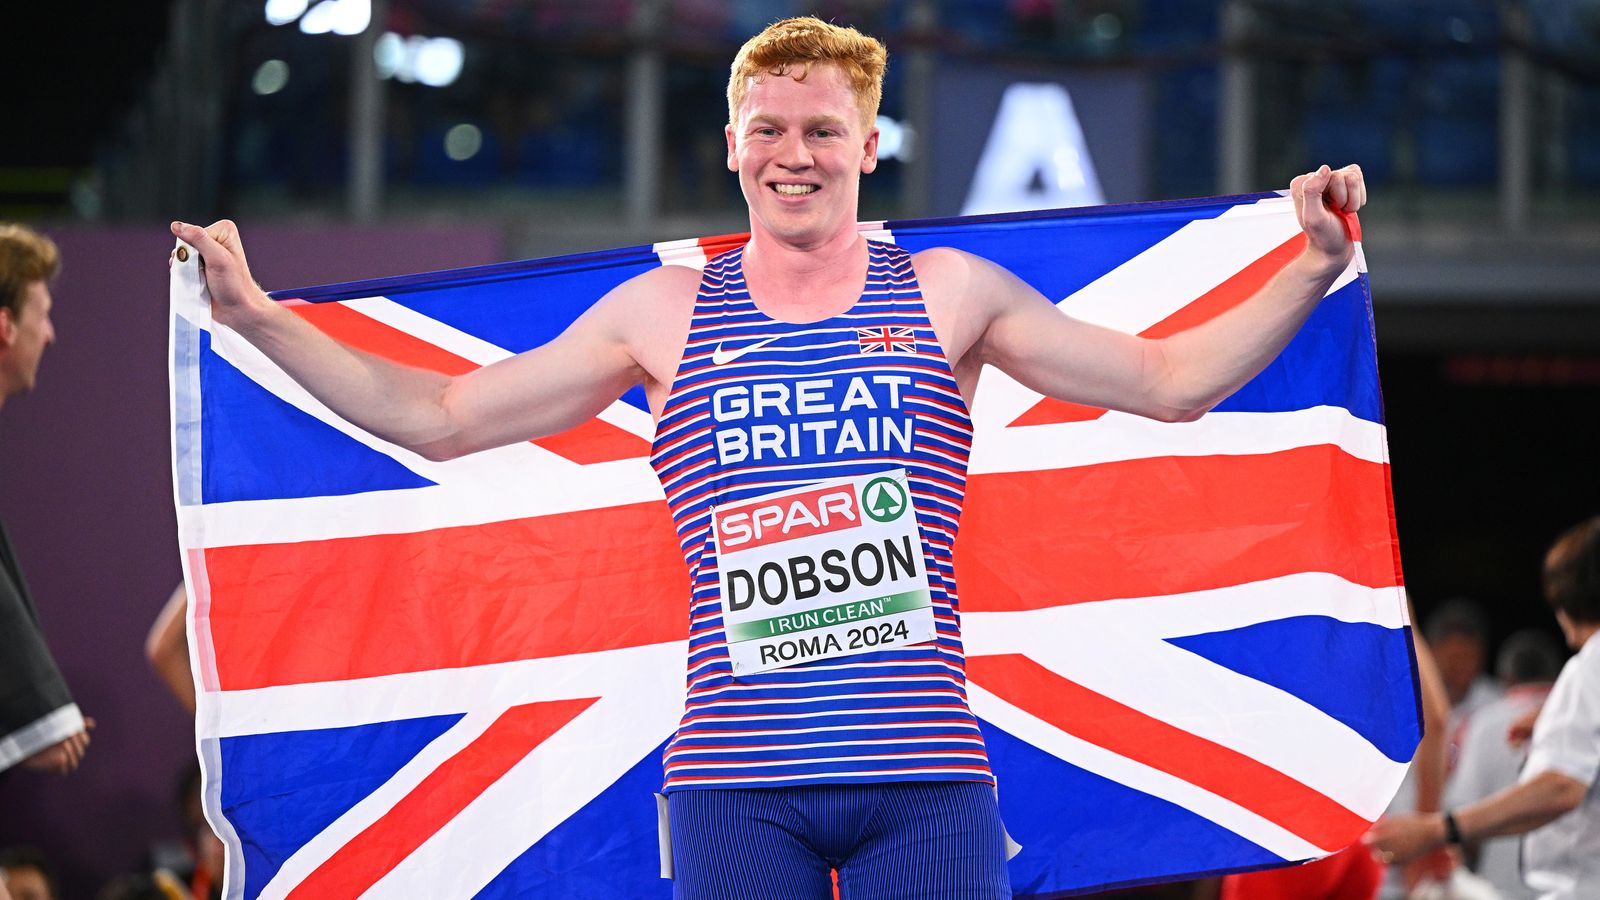 European Athletics Championships: Charlie Dobson and Molly Caudery on podium for Great Britain | Athletics News